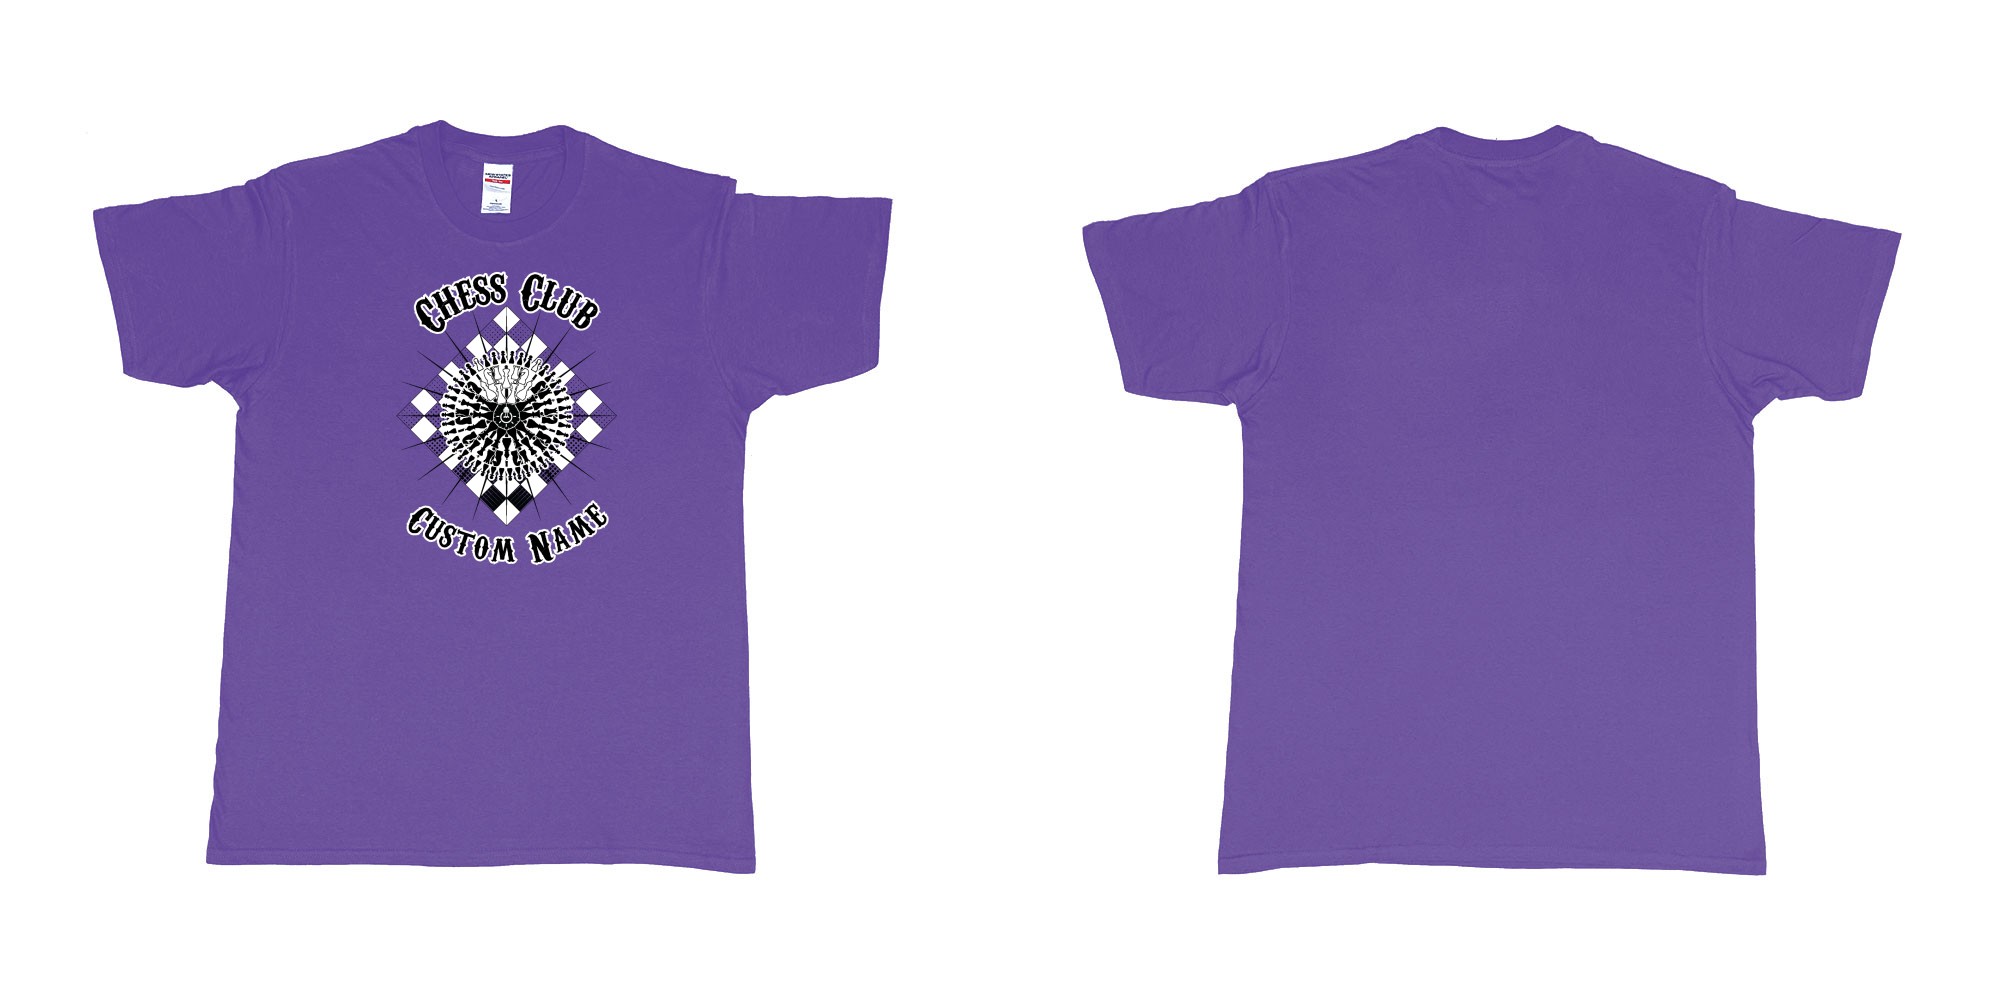 Custom tshirt design chess club mandala in fabric color purple choice your own text made in Bali by The Pirate Way